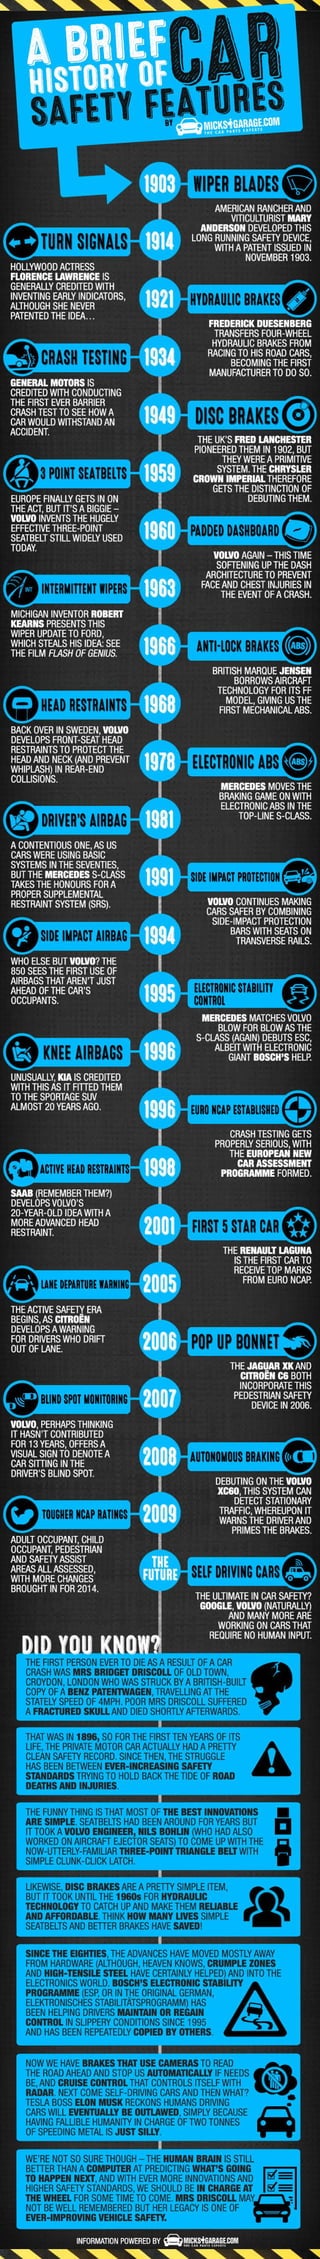 History of Car Safety features. An Infographic By MicksGarage